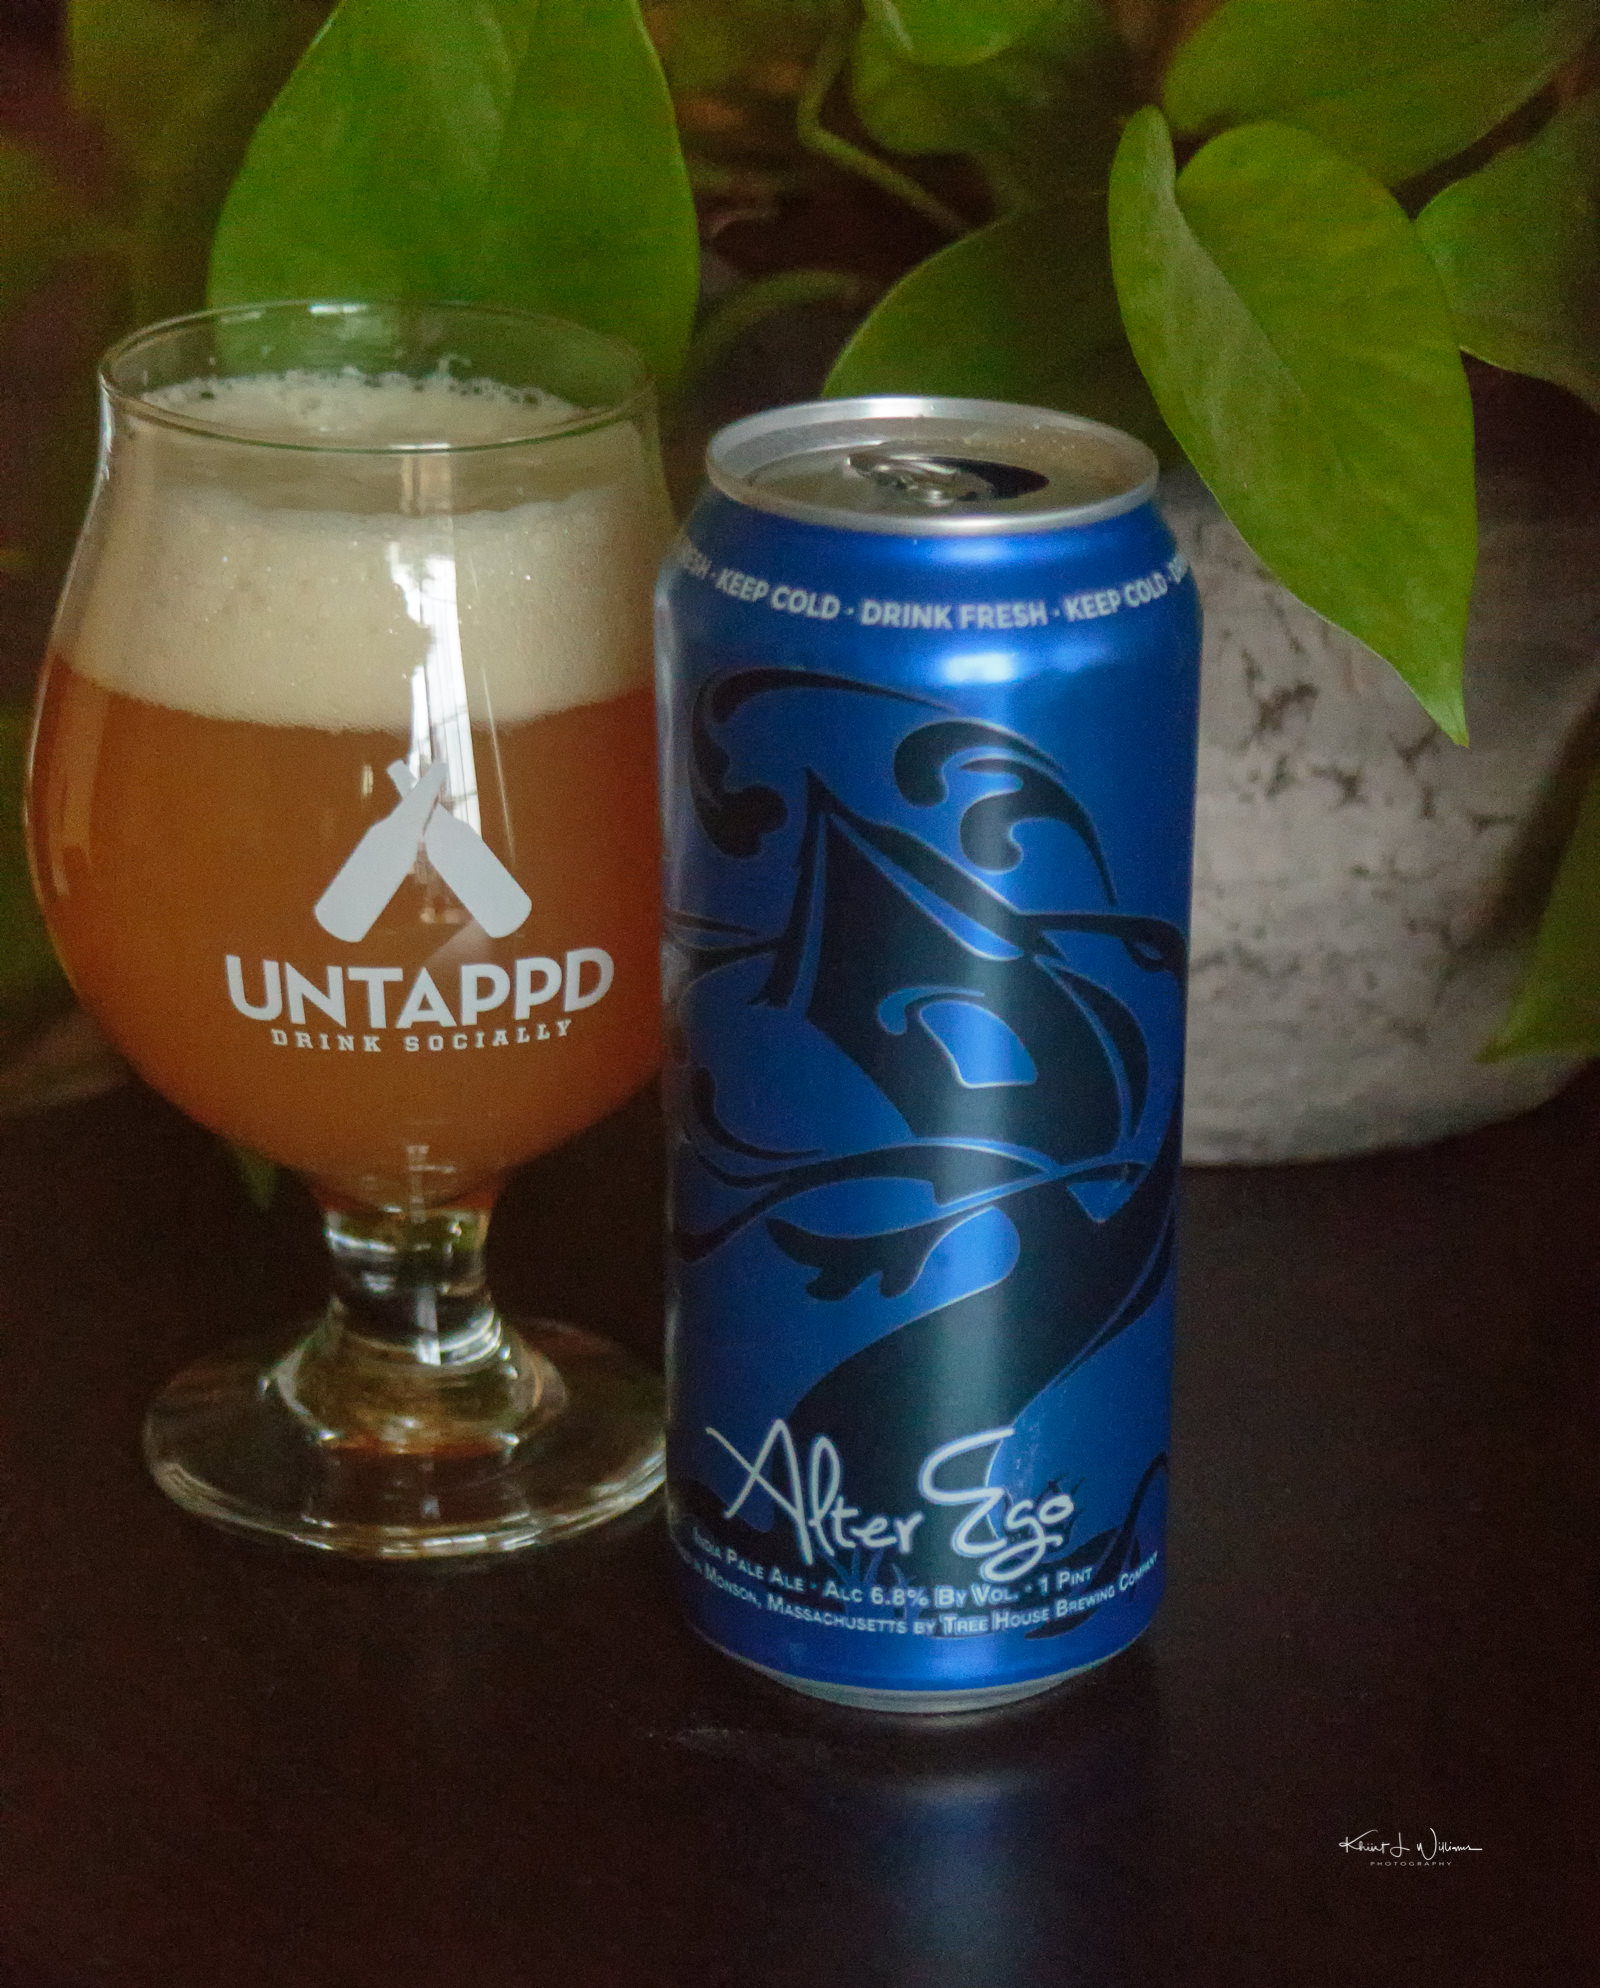 Tree House Brewing Company's Alter Ego